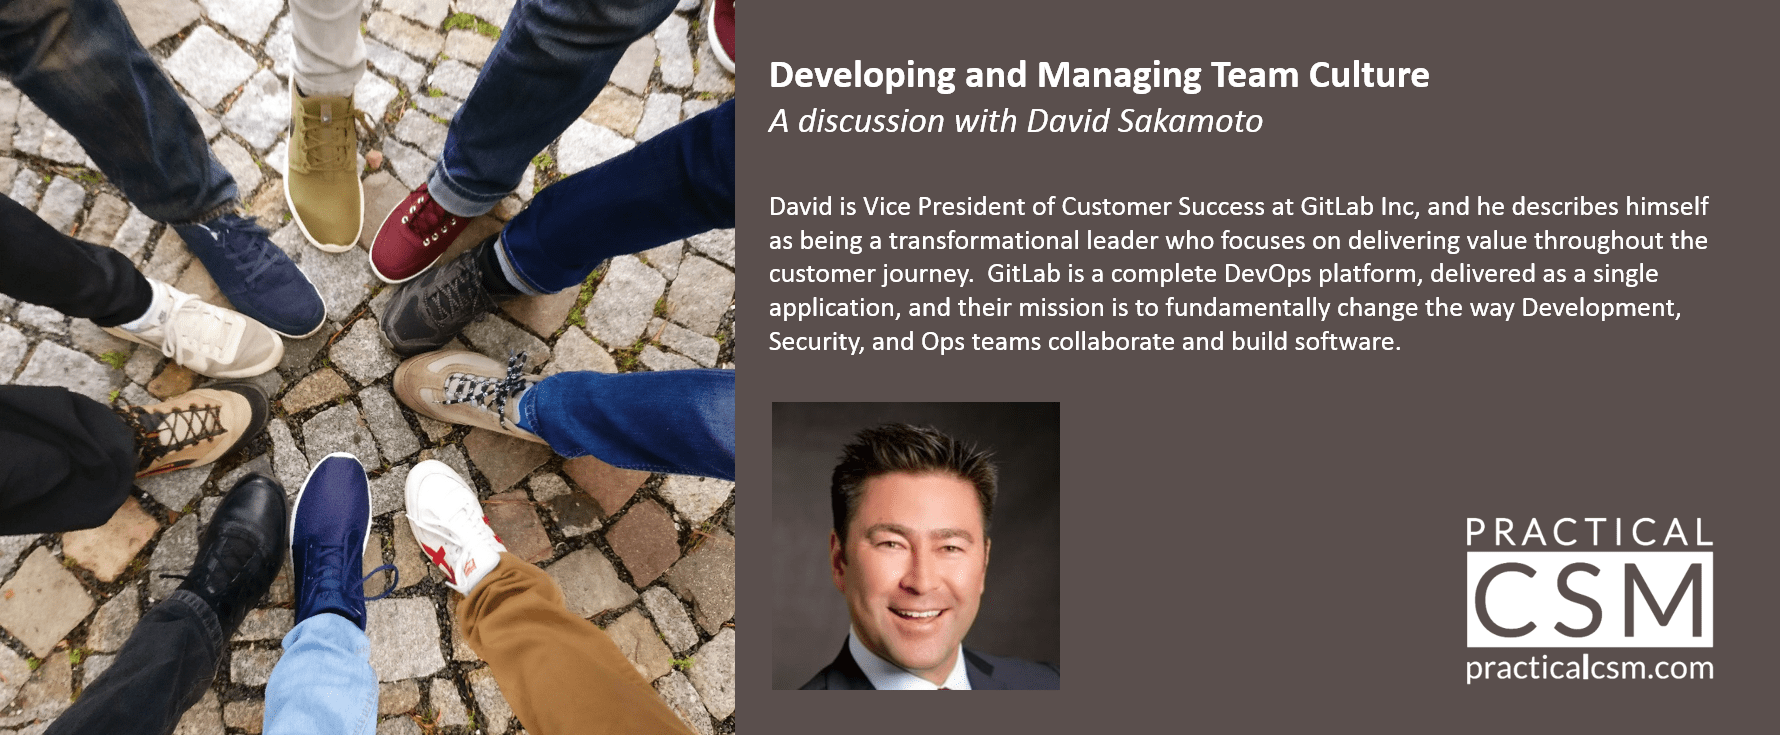 Developing and Managing Team Culture discussion with David Sakamoto - Practical CSM